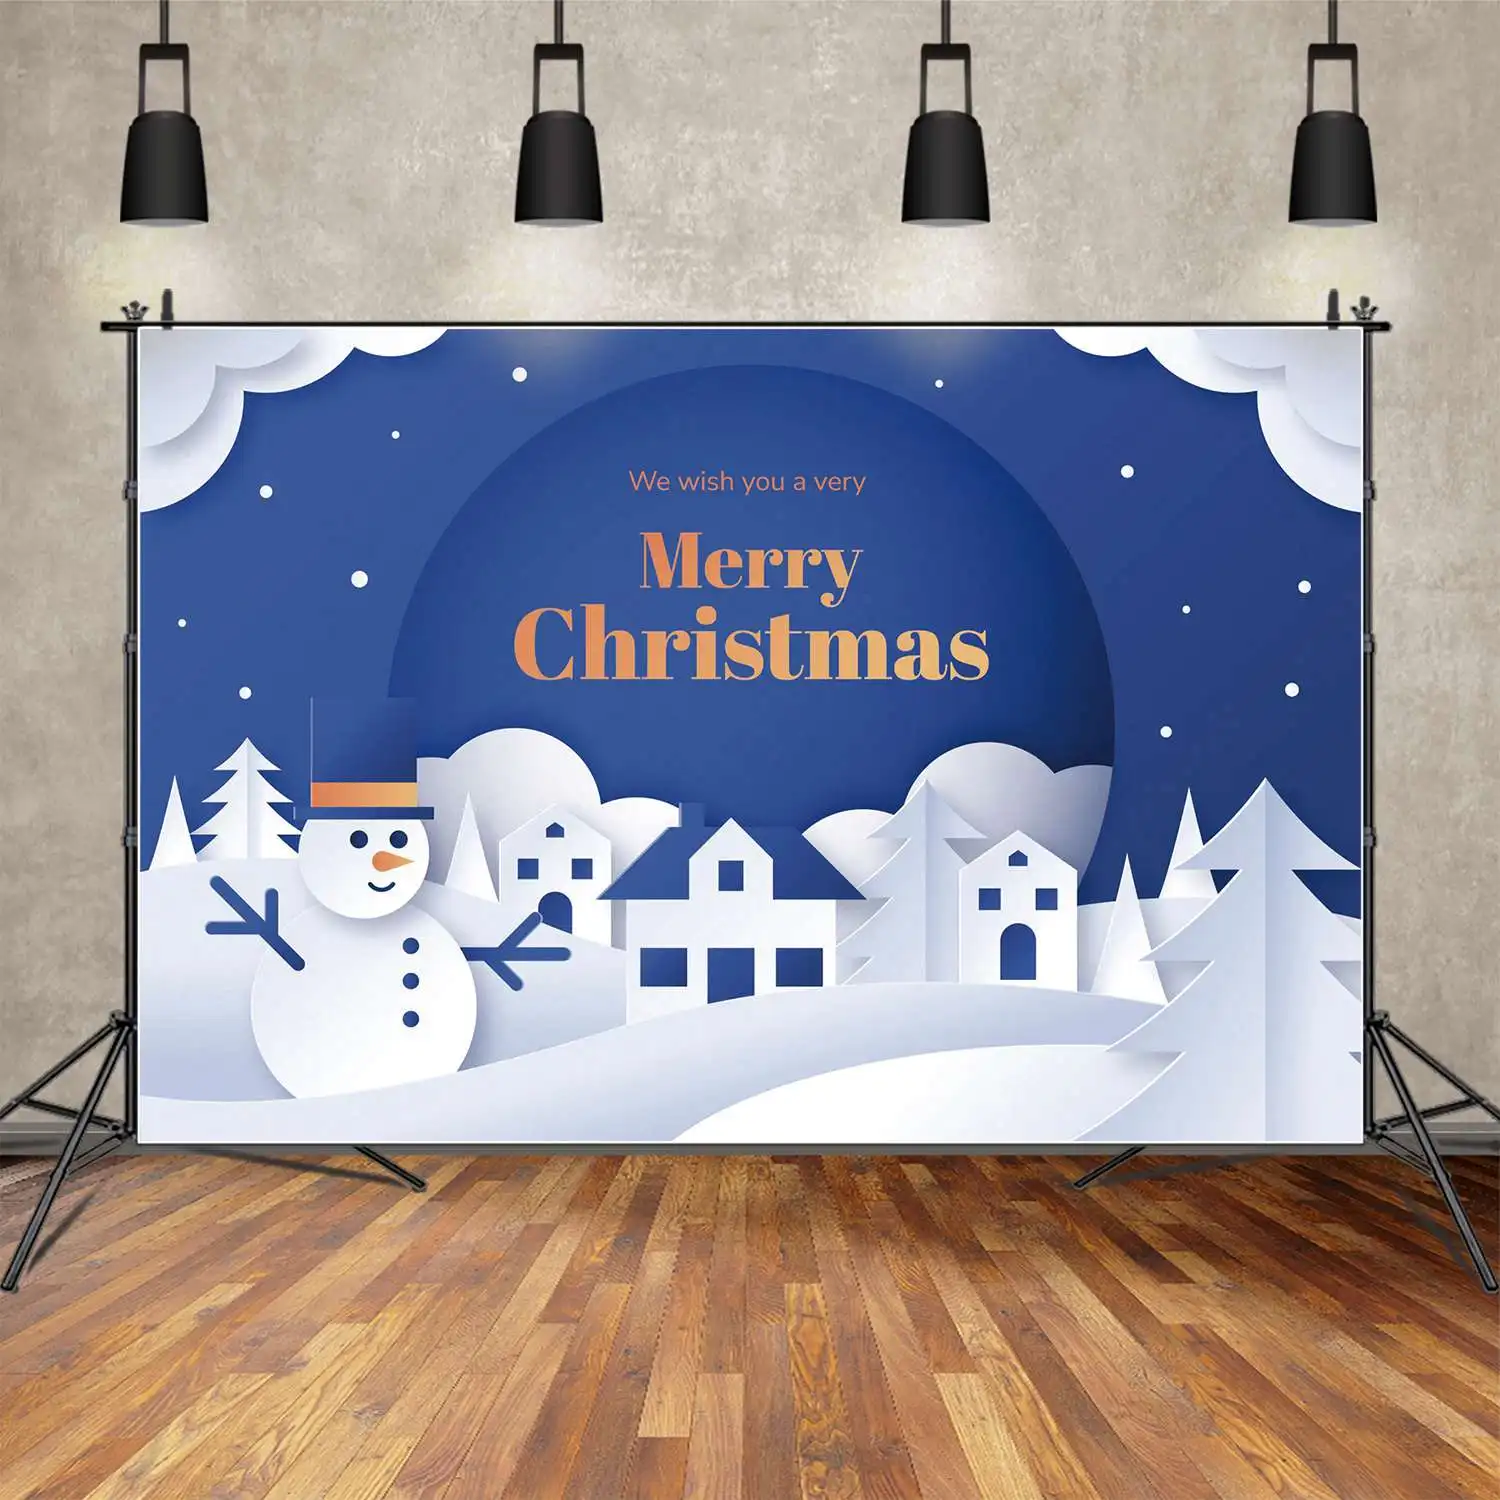 

MOON.QG Backdrop Merry Christmas Boy White Snowman Mountain Home Party Banner Background Snow Ground Blue Sky Photo Booth Props